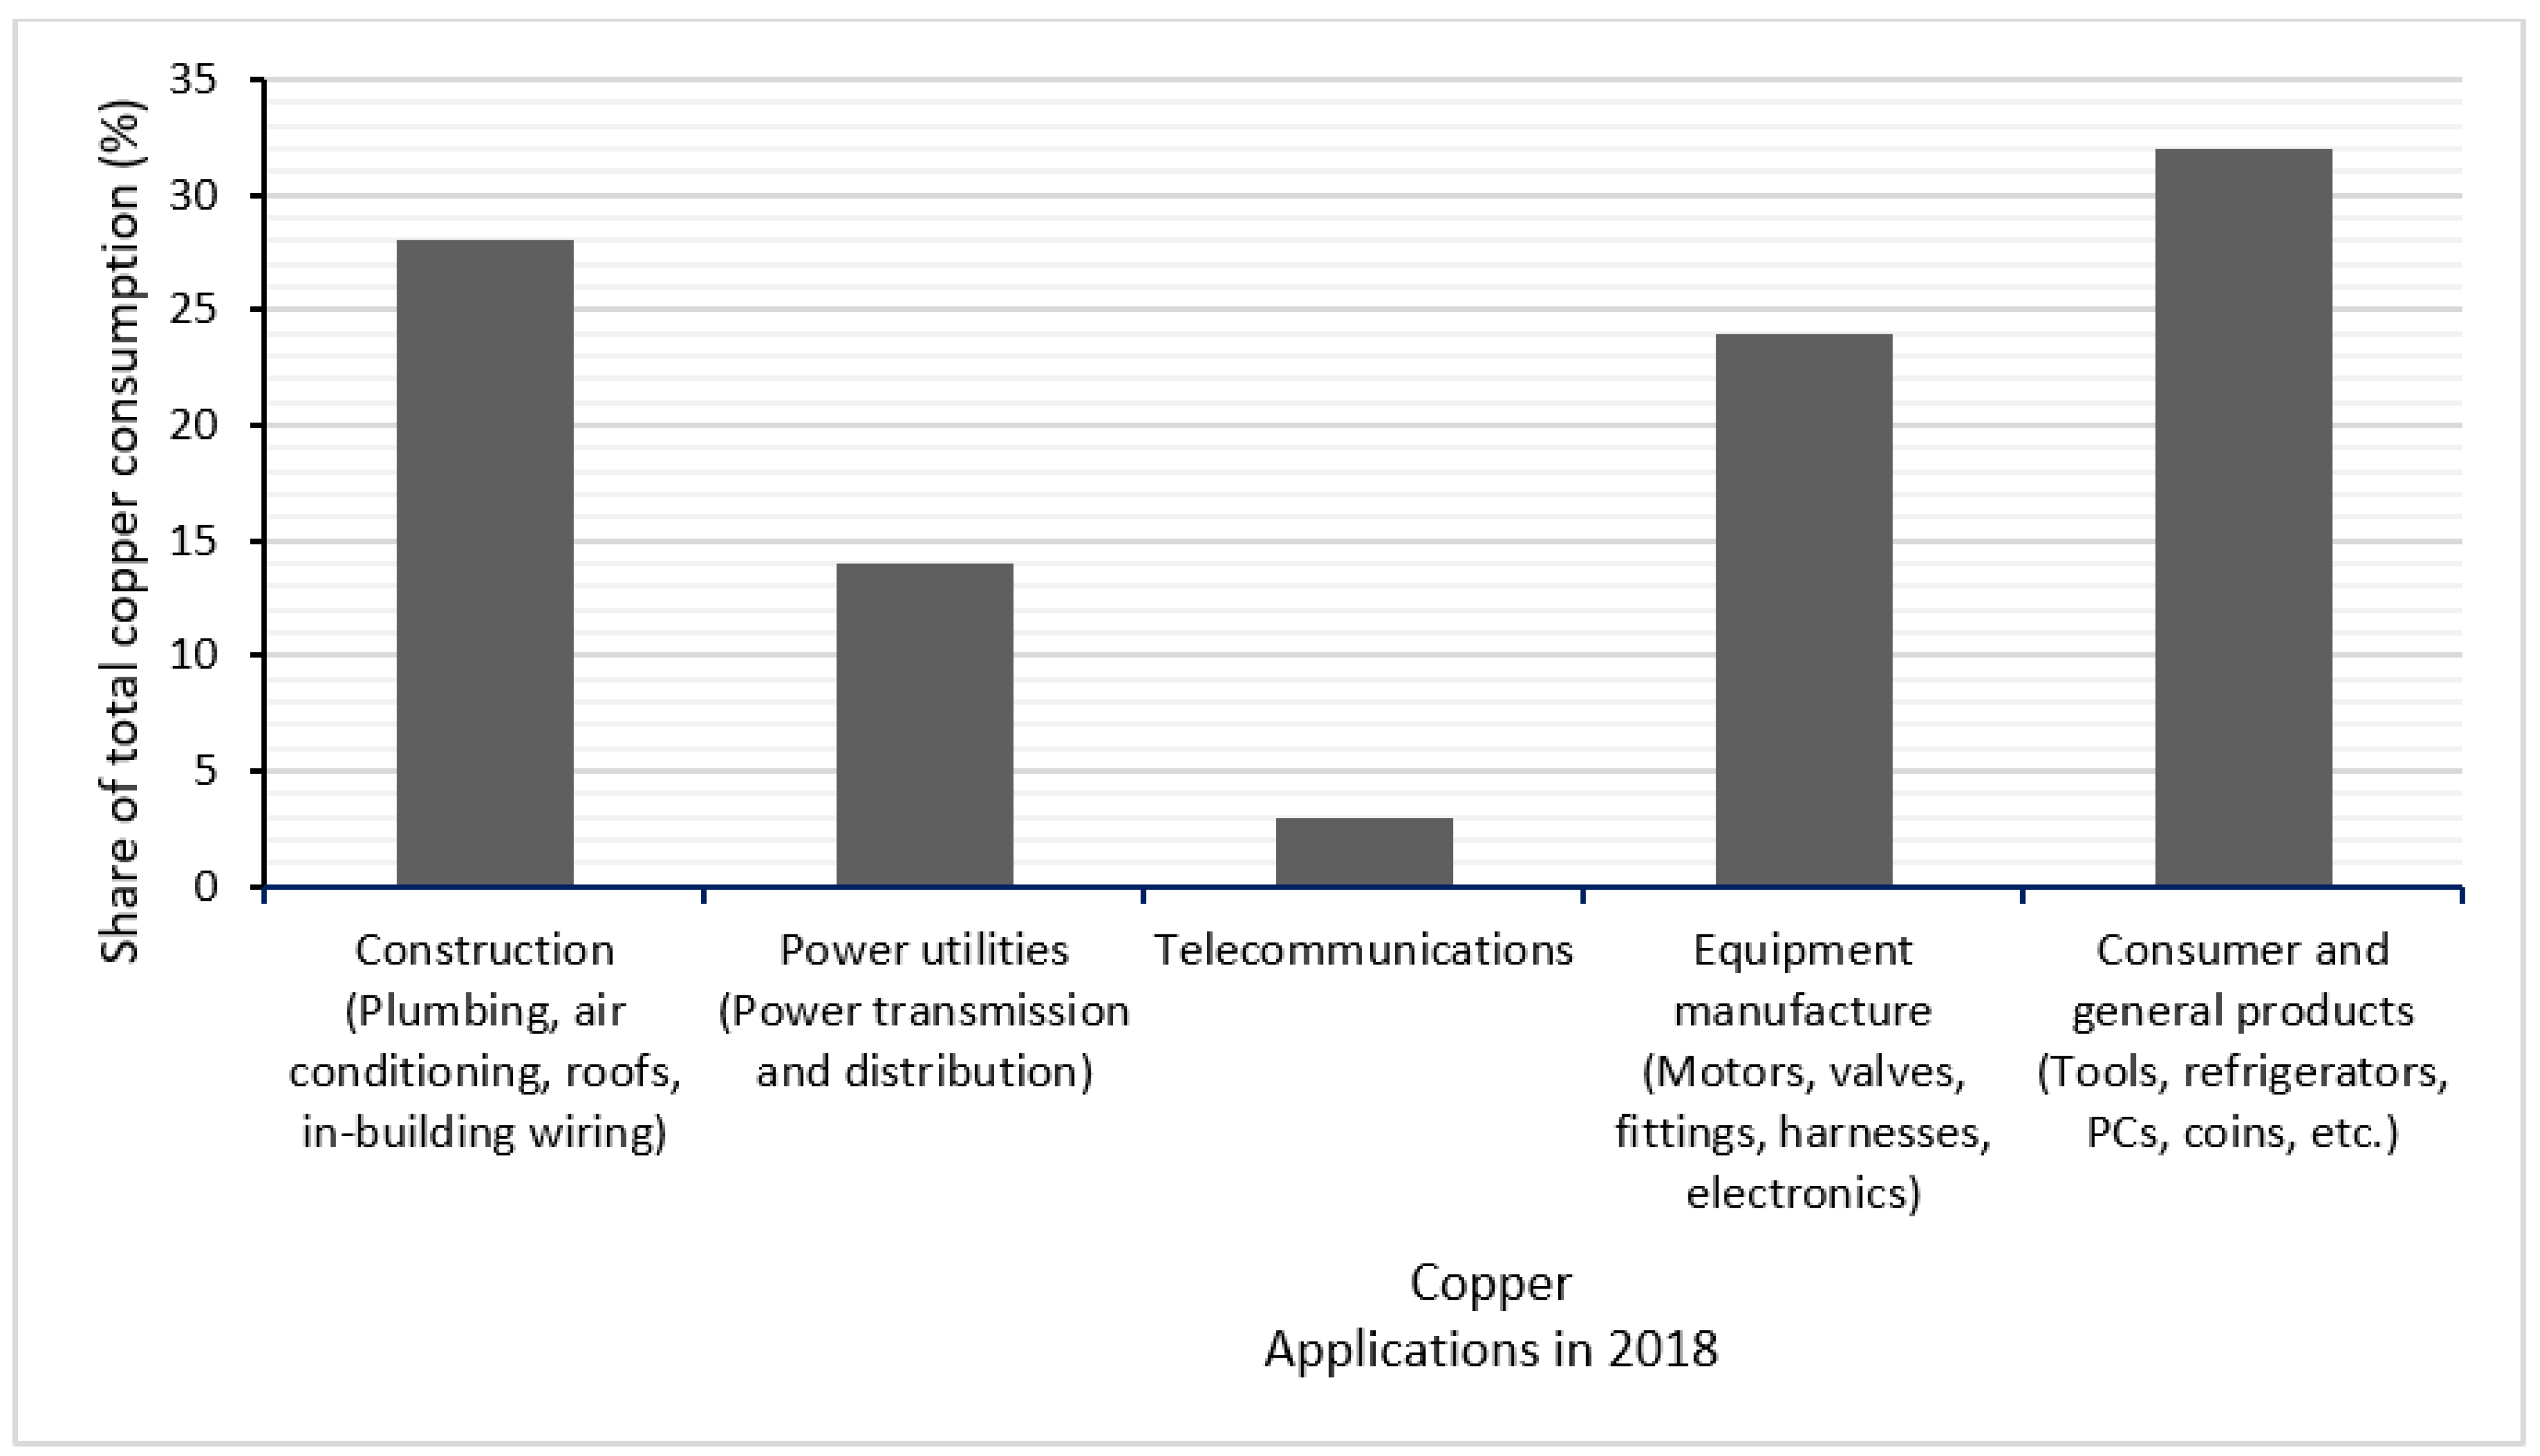 The role of copper in the energy transition